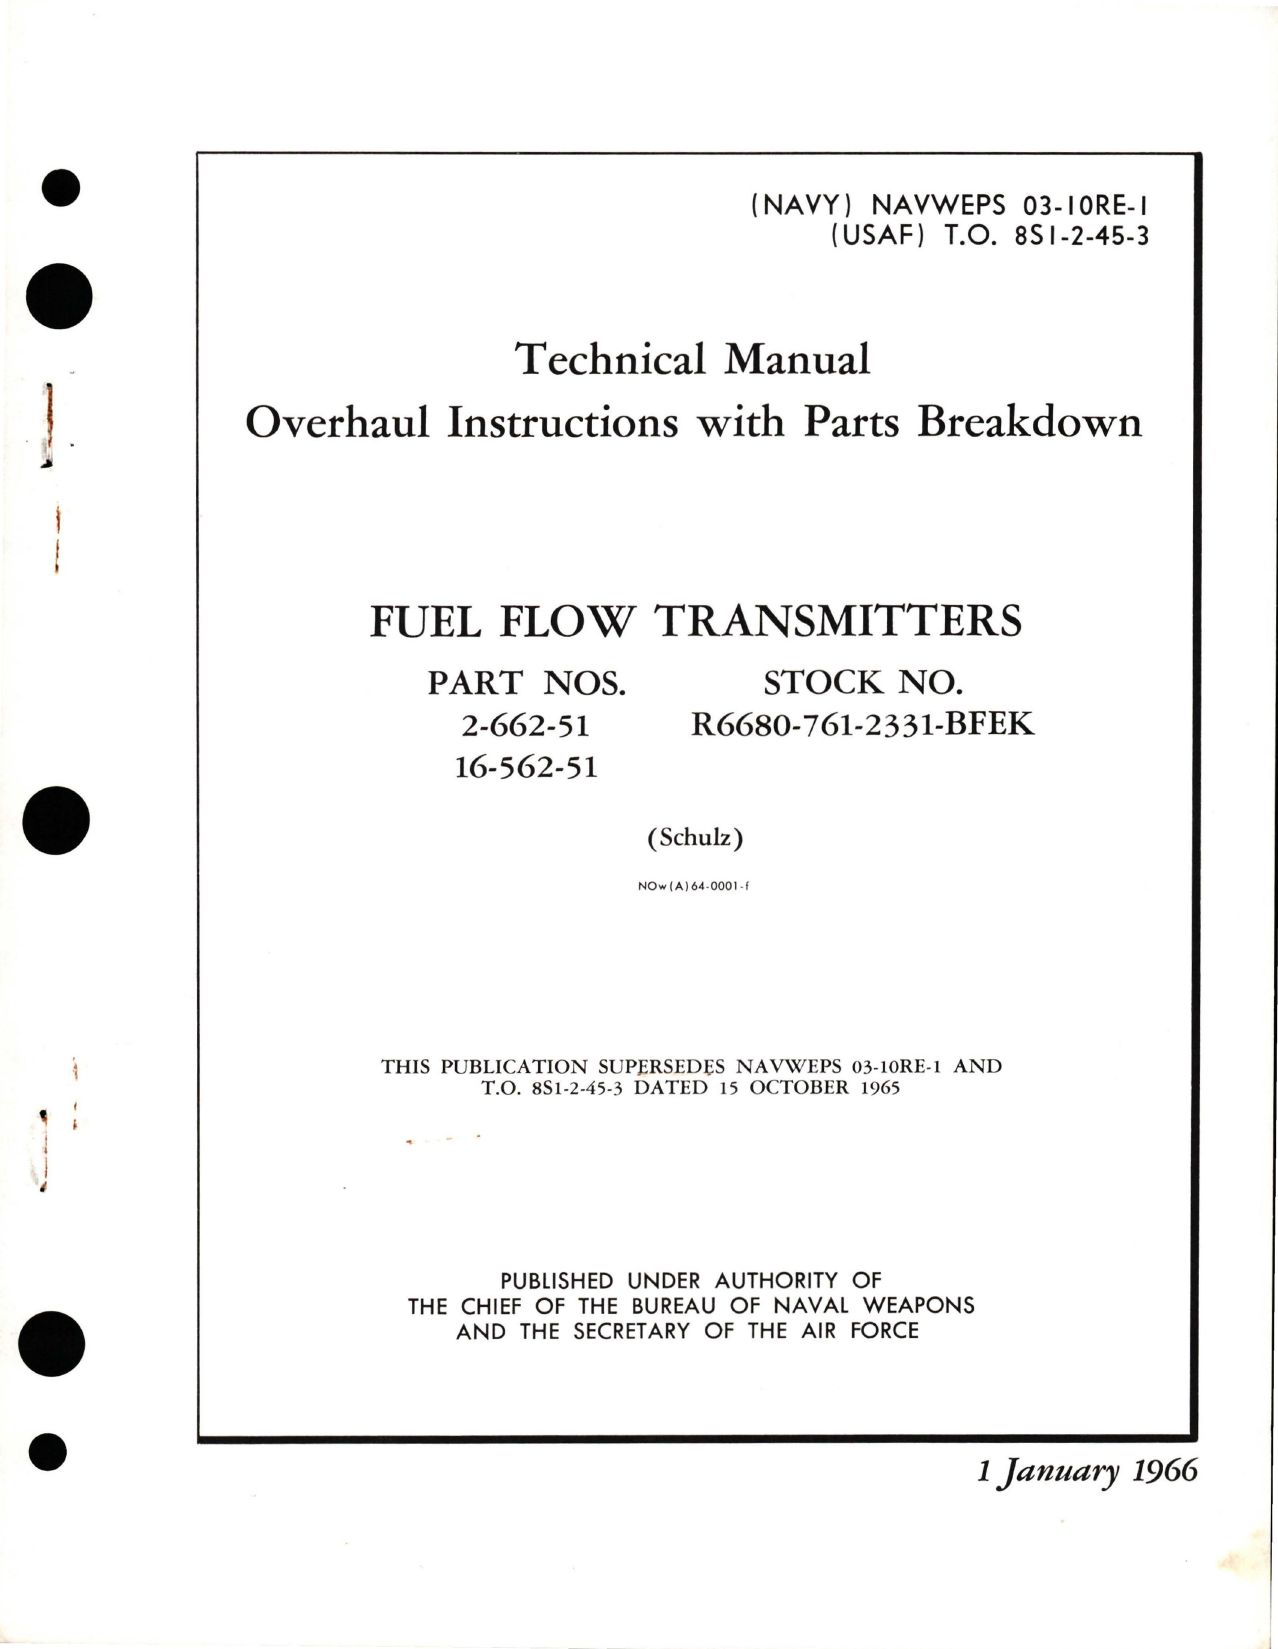 Sample page 1 from AirCorps Library document: Overhaul Instructions with Parts Breakdown for Fuel Flow Transmitters - Parts 2-662-51, 16-562-51 